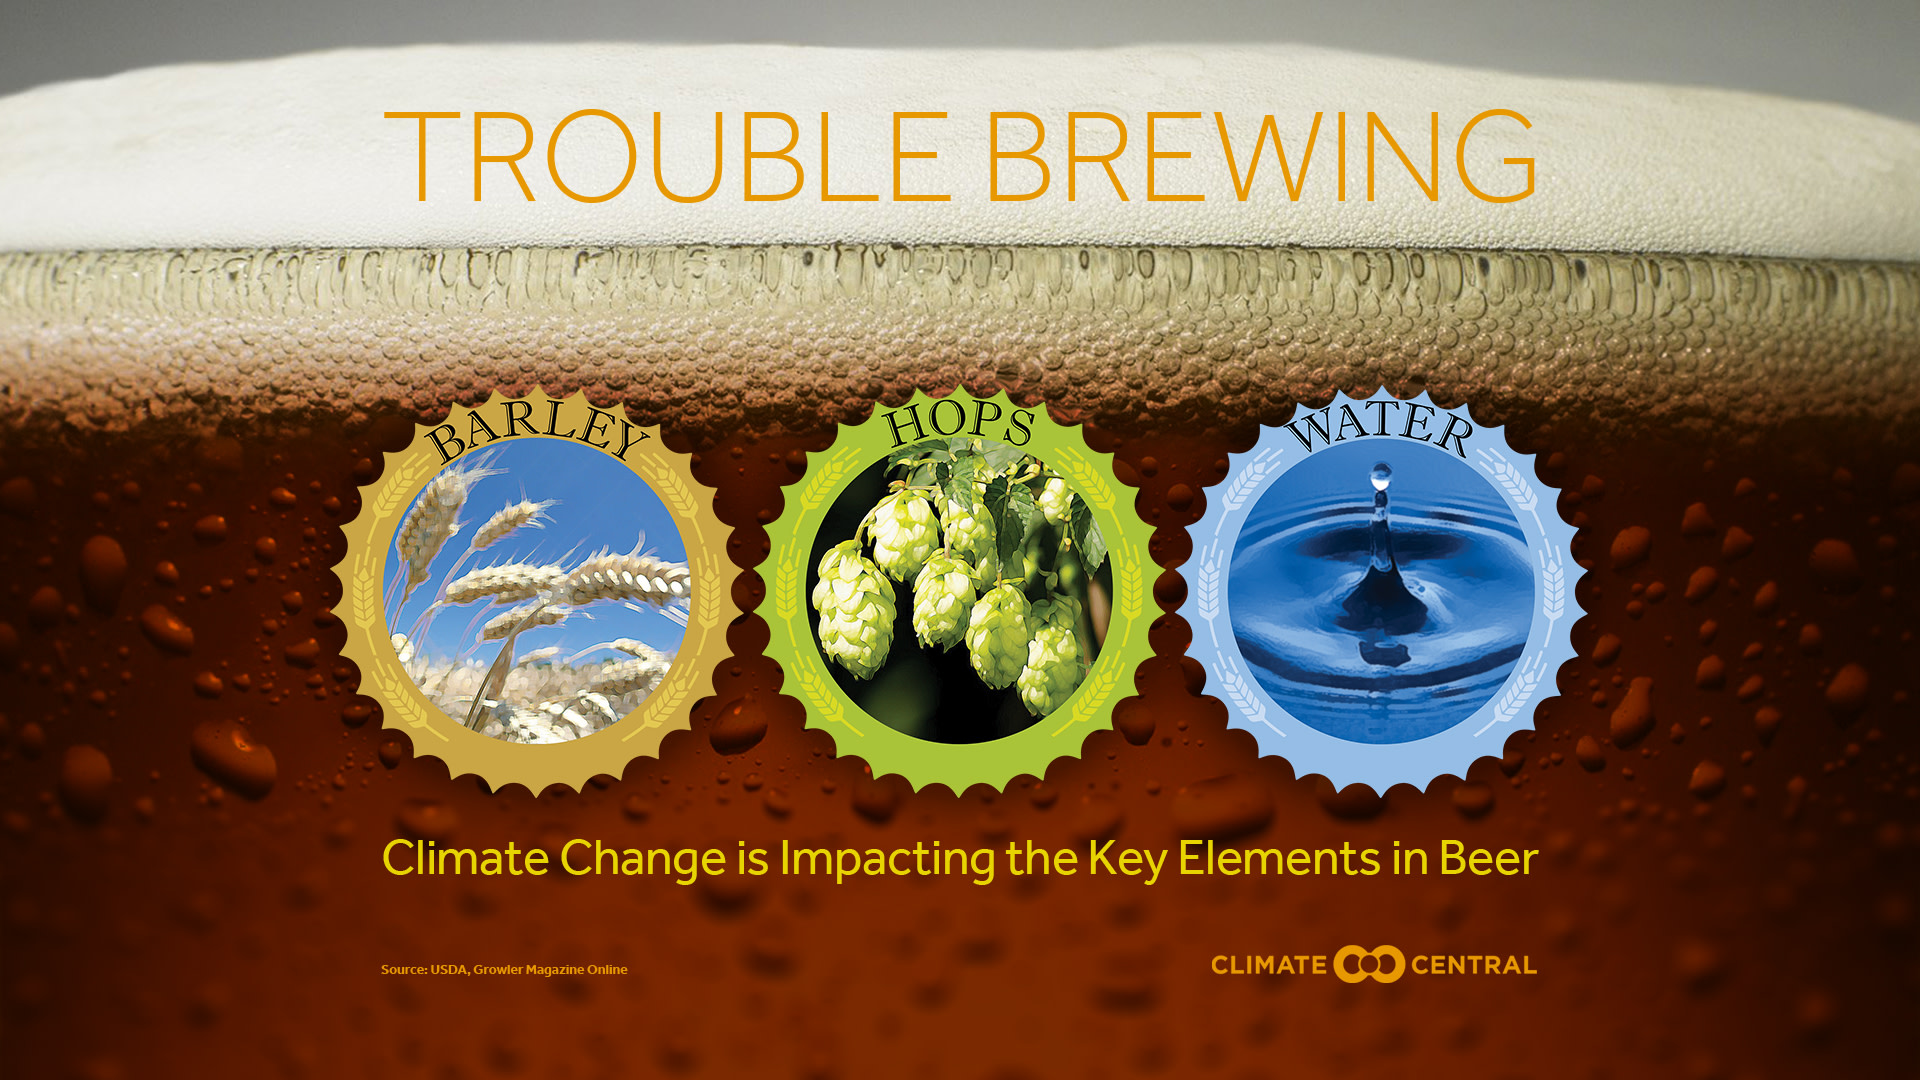 Set 4 - Heavy Rain, Climate Extremes, and Beer